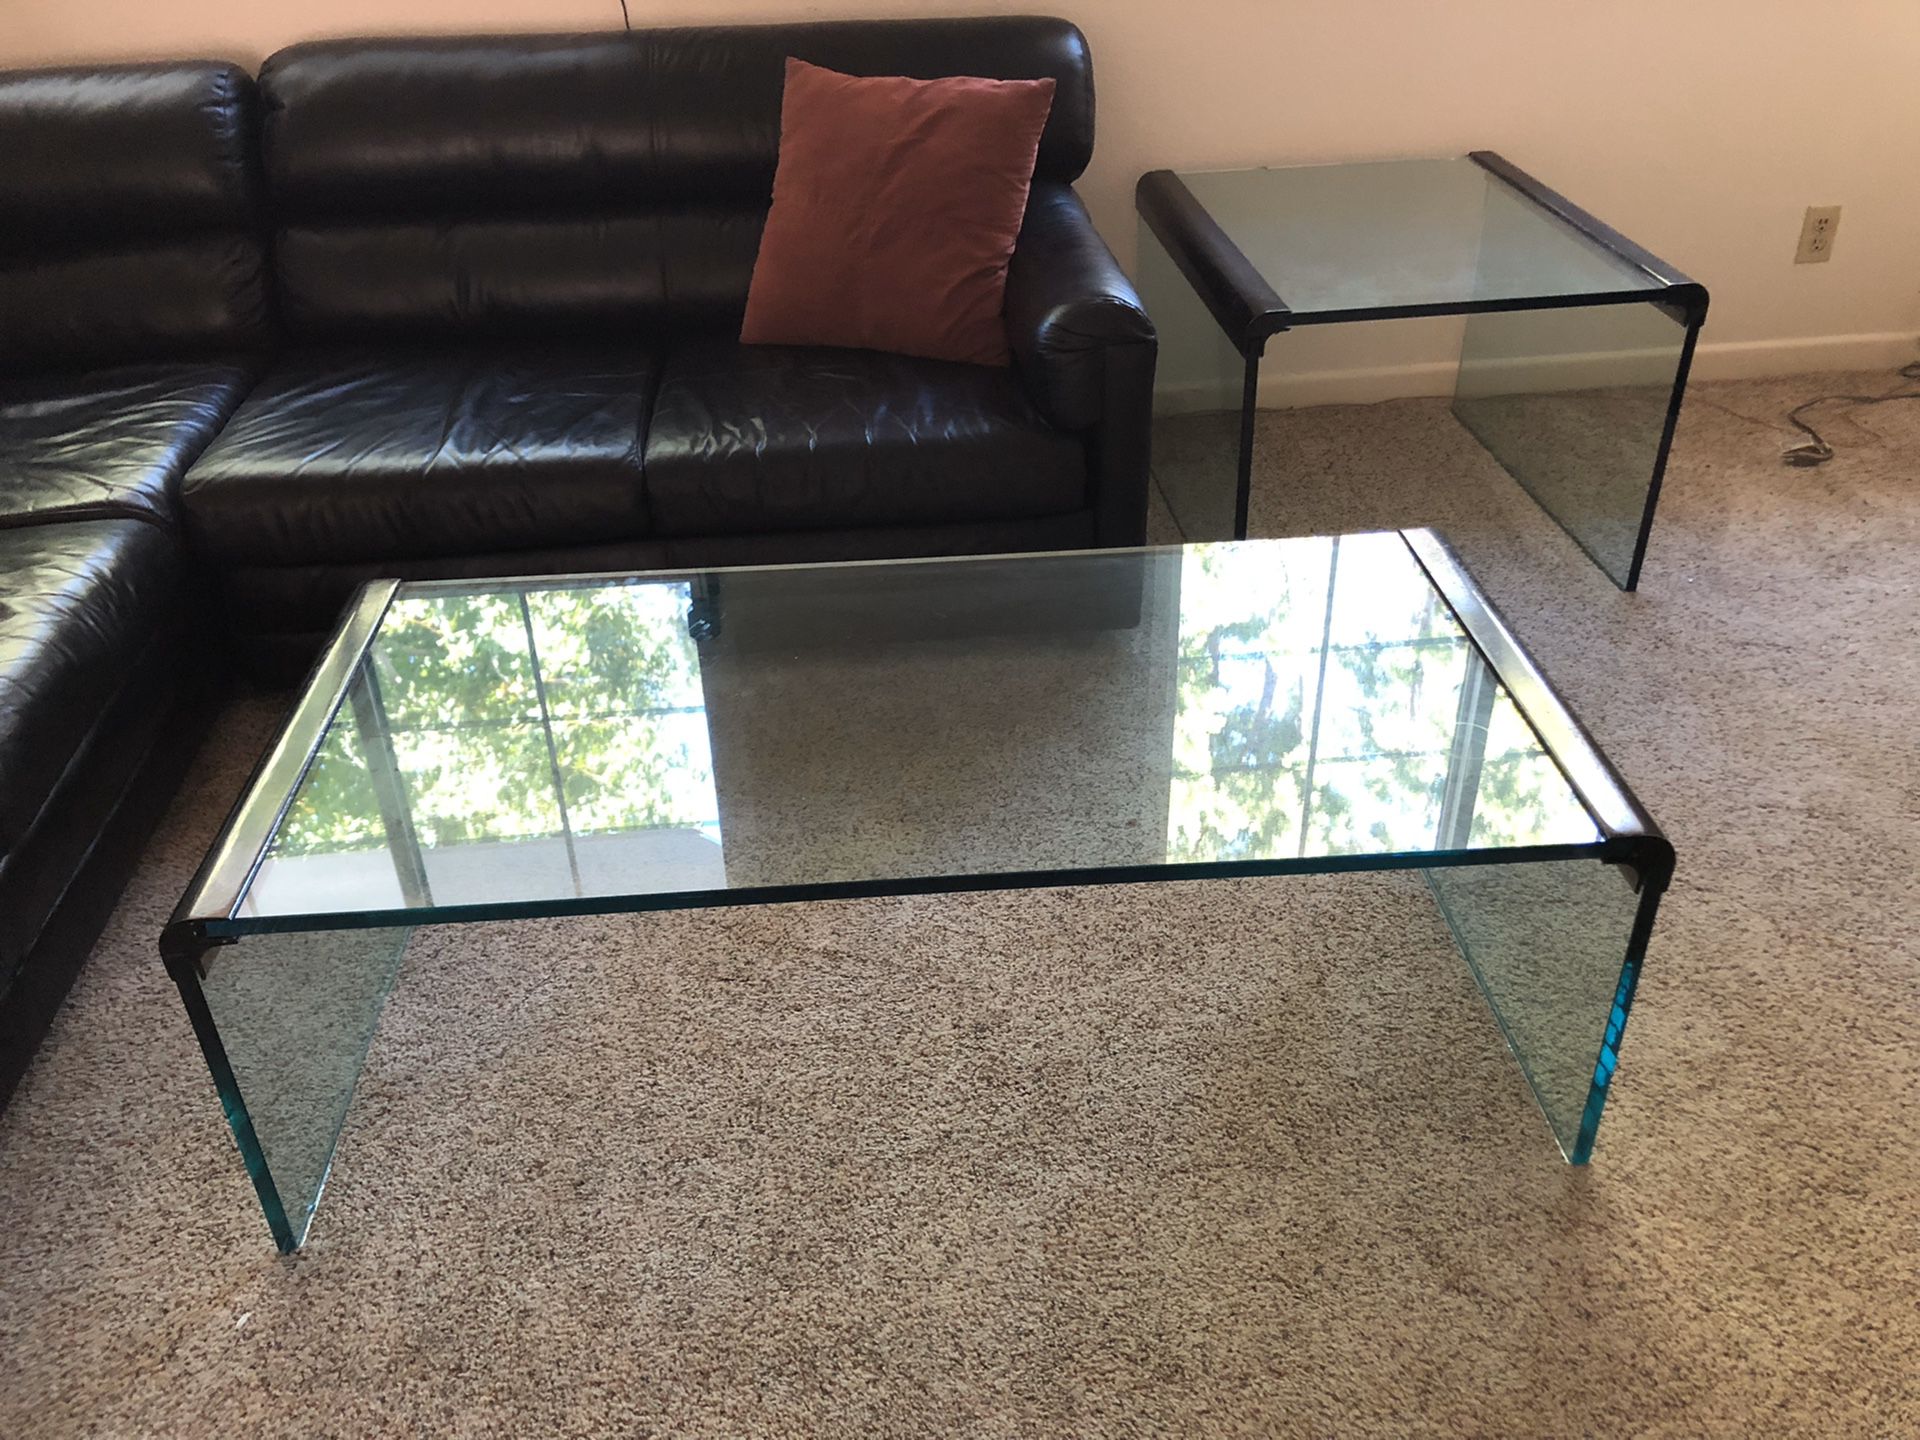 Two heavy glass coffee tables